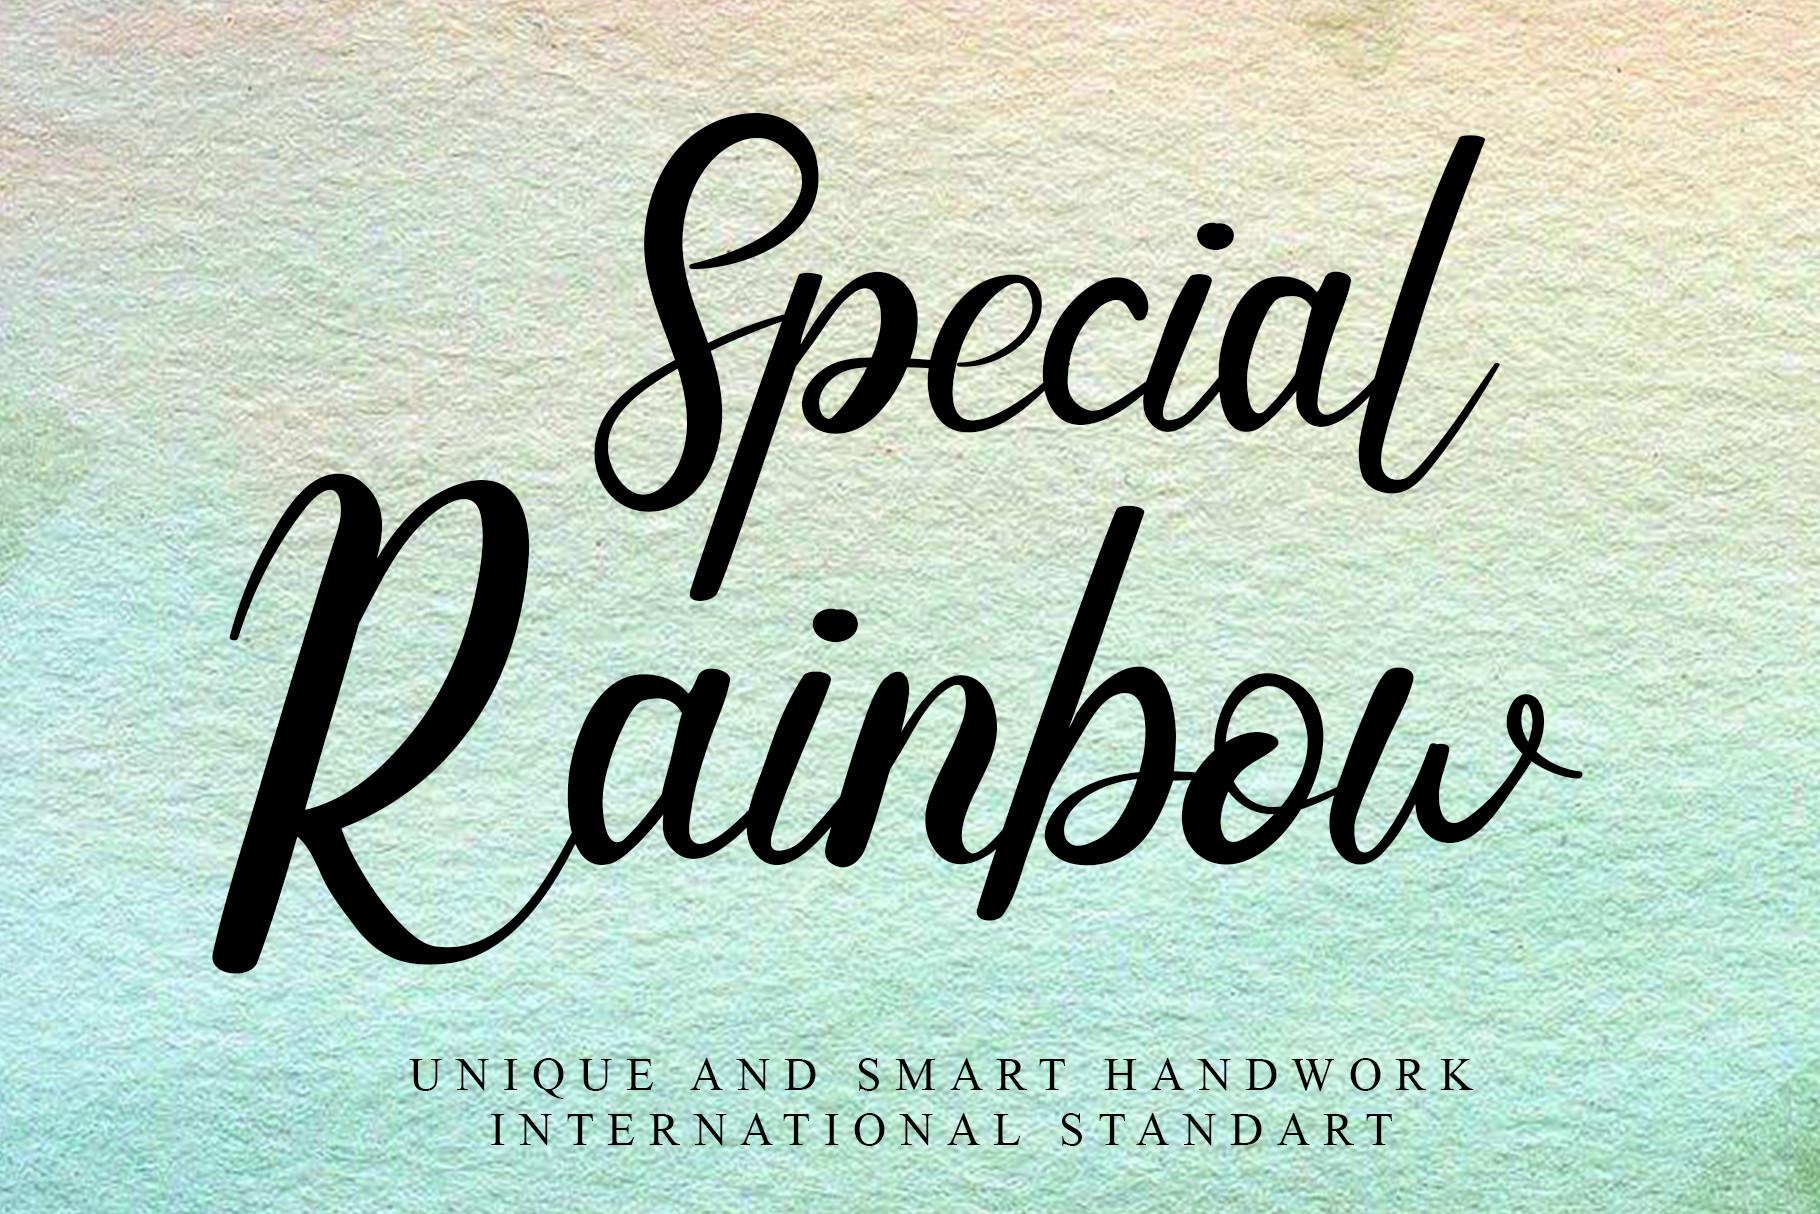 Special Rainbow Font